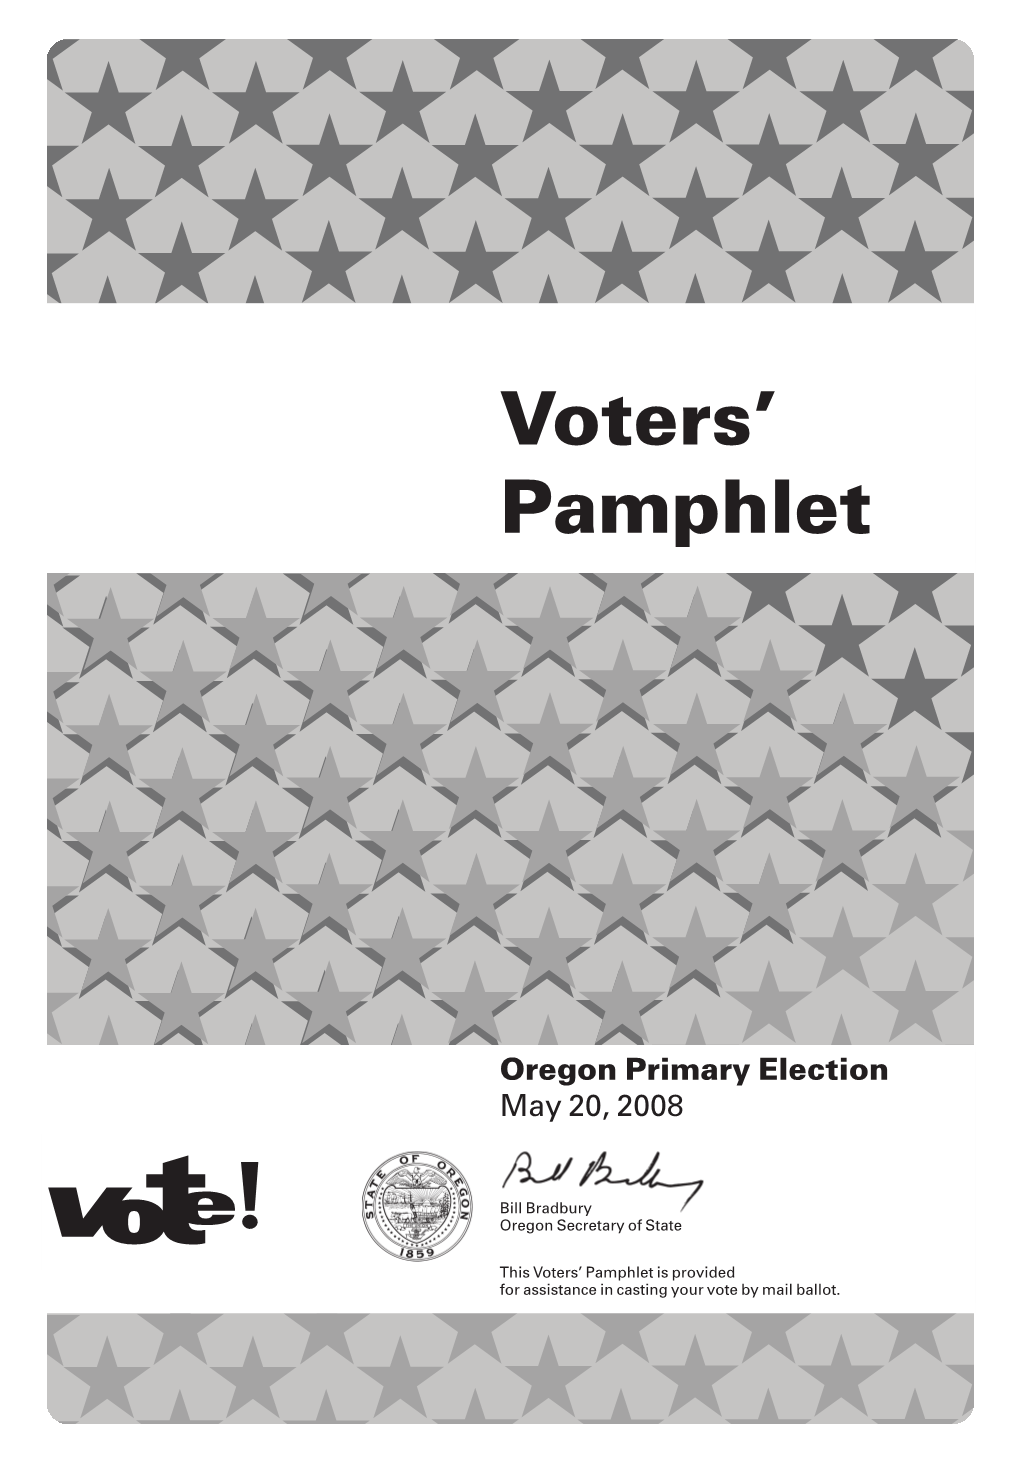 Voters' Pamphlet Are Available on the Web At